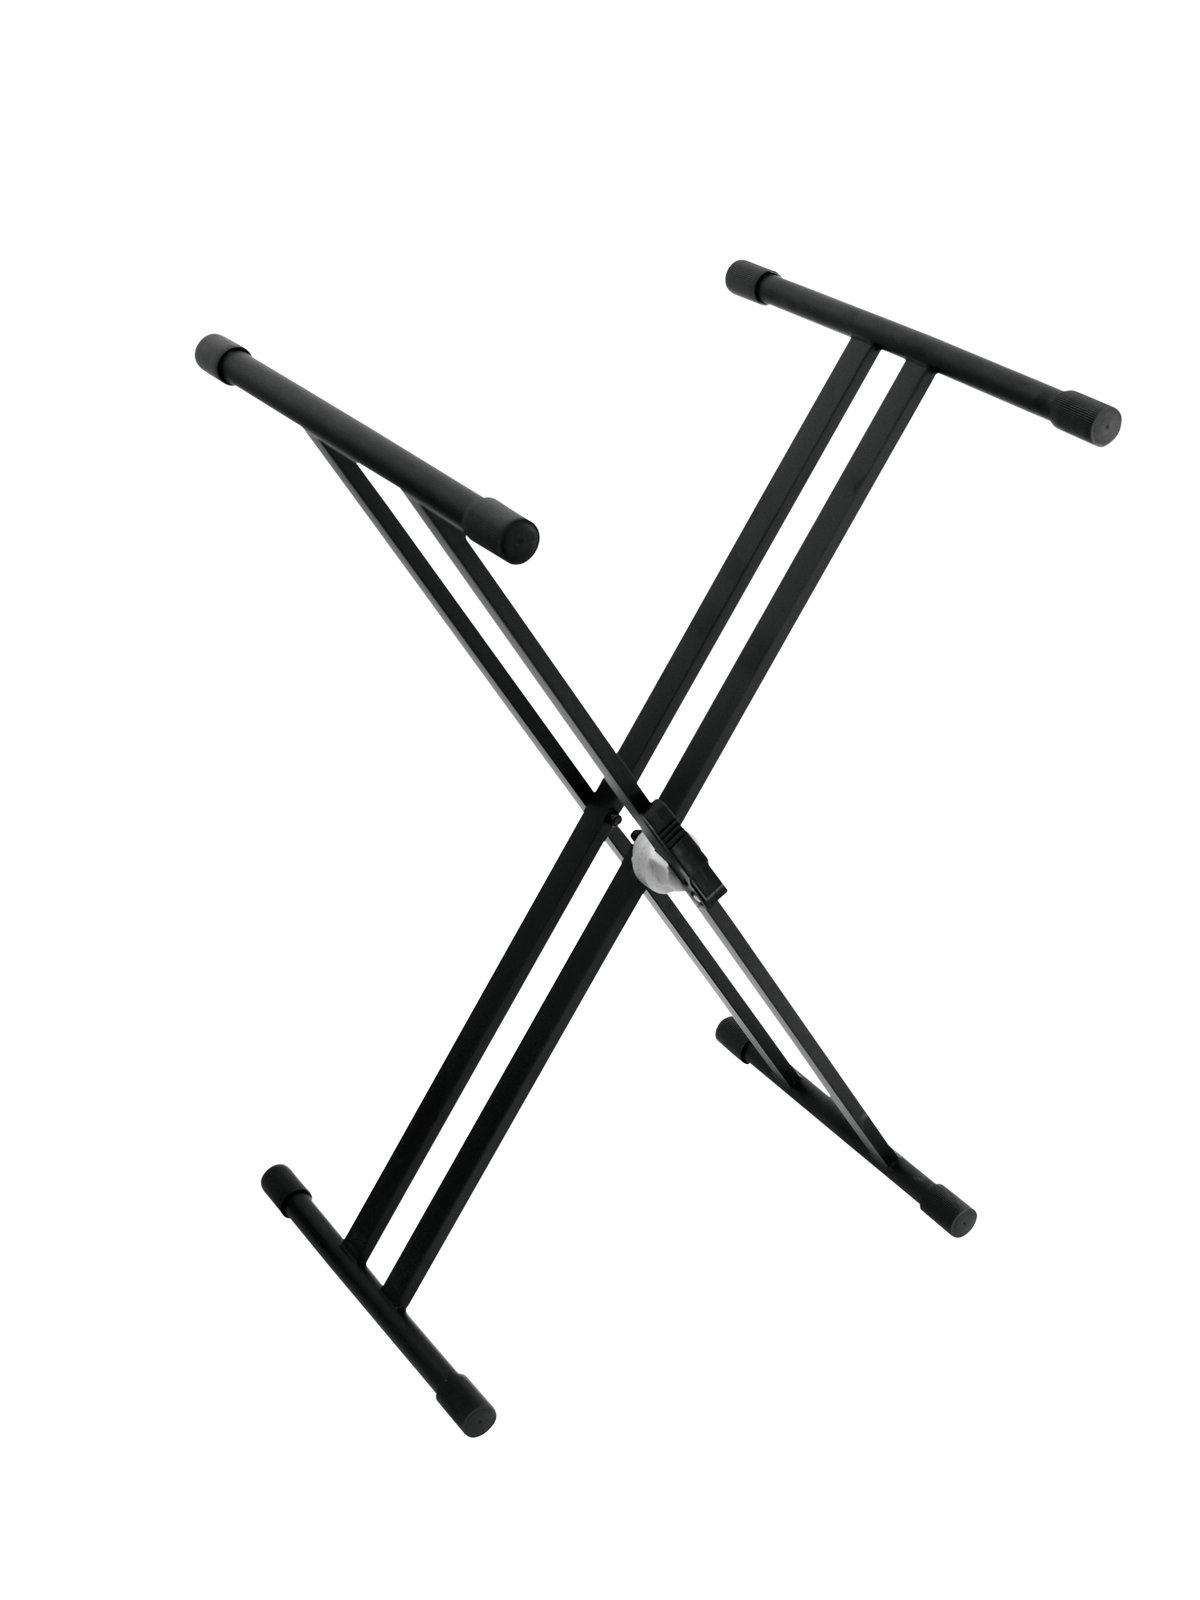 DIMAVERY SV-1 Keyboard Stand with Clamp Lock